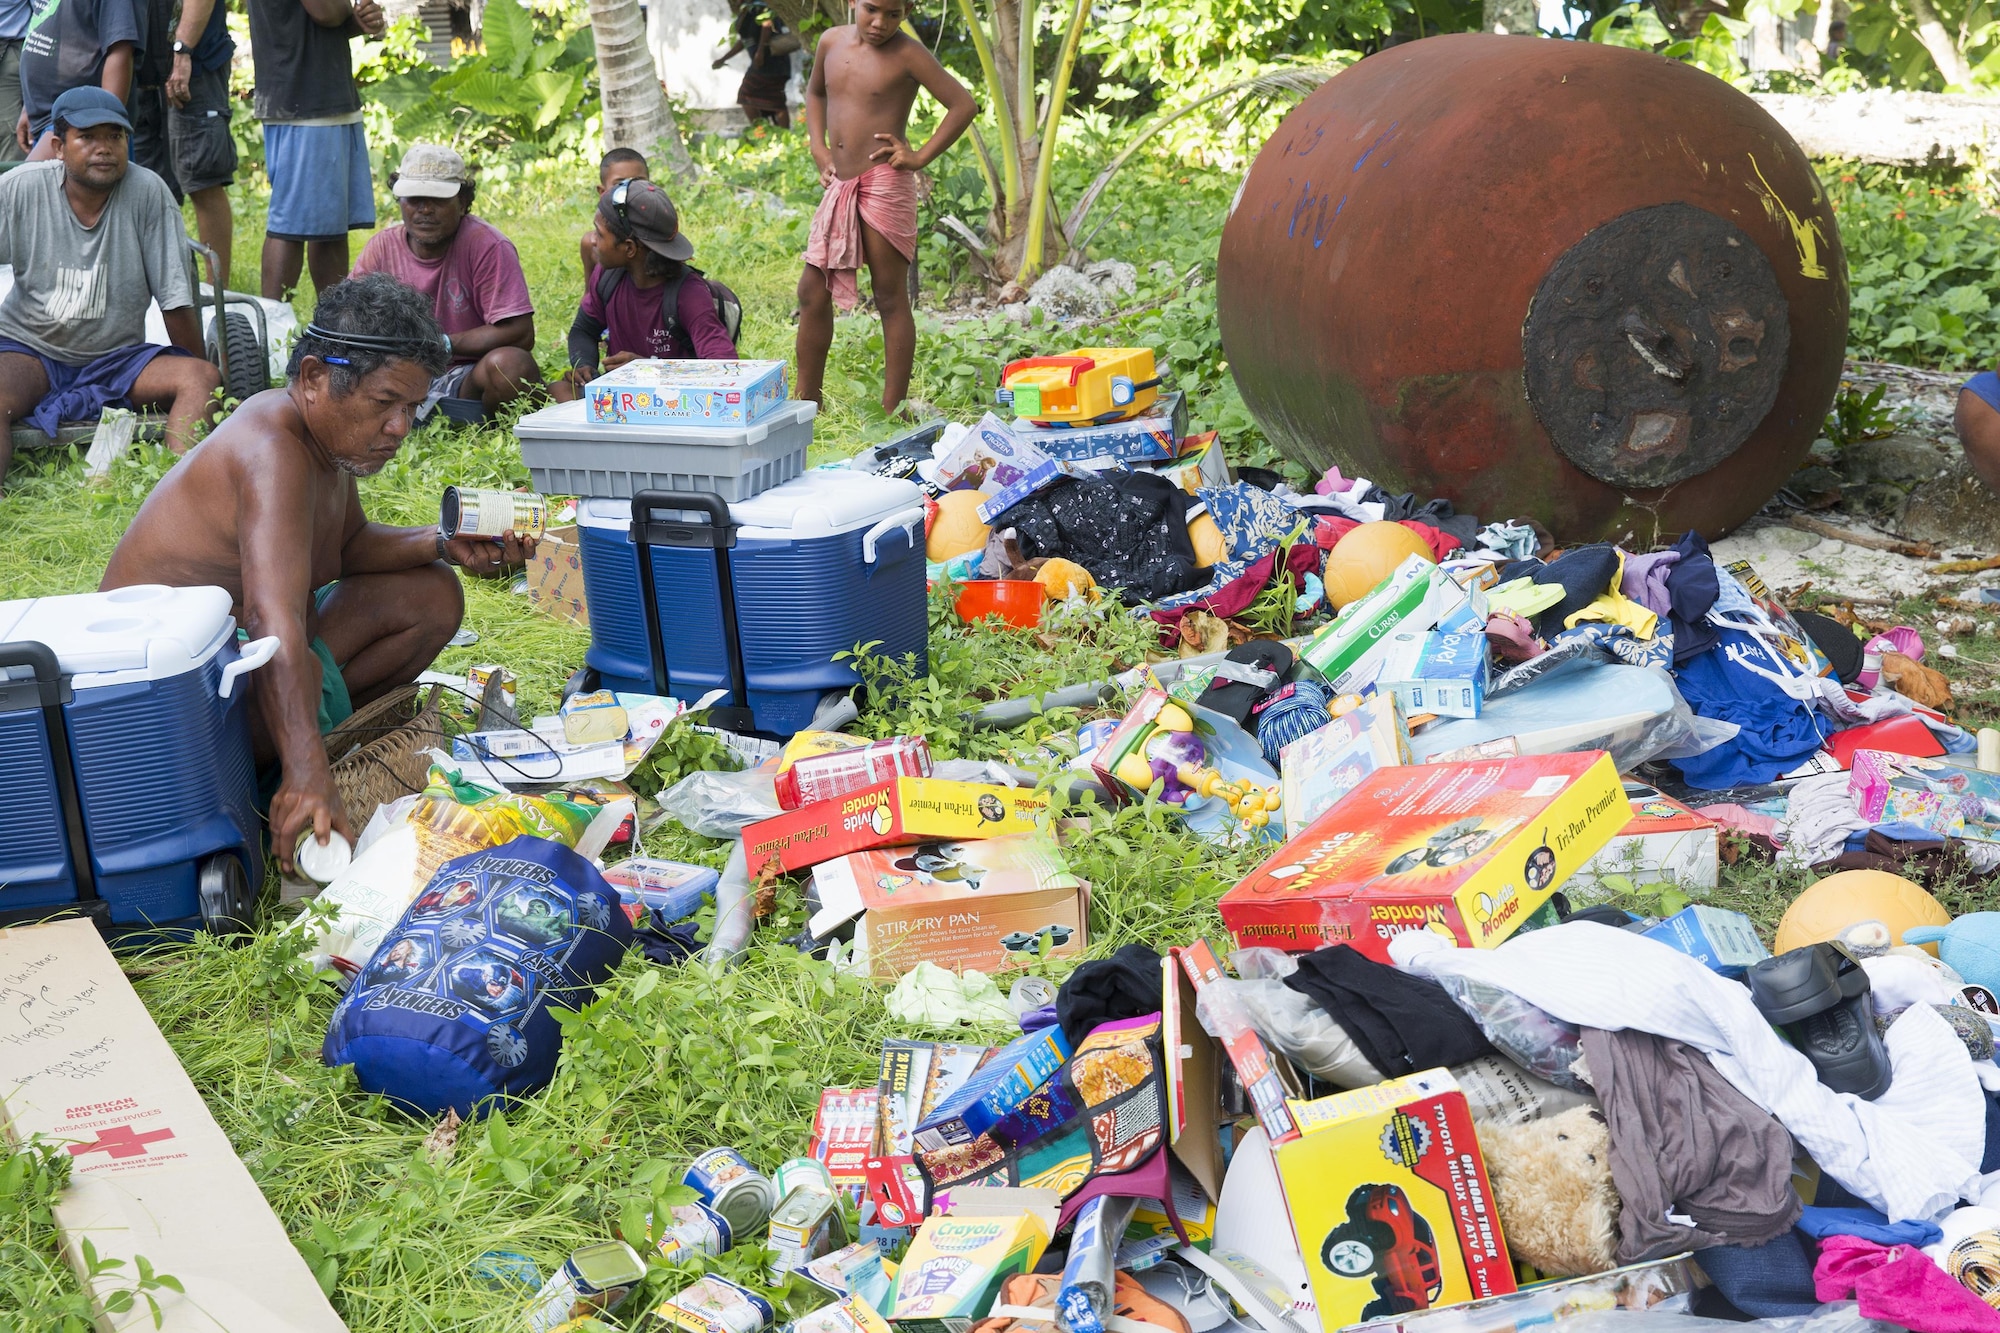 Louis Mangtau, Chief of Fais Island, sorts through supplies that were dropped during Operation Christmas Drop 2015, Dec. 8, 2015, at Fais Island, Federated States of Micronesia. Operation Christmas Drop is a humanitarian/disaster relief training event where C-130 crews provide critical supplies to 56 islands throughout the Commonwealth of the Northern Marianas, Federated States of Micronesia and Republic of Palau. This year marks the first ever trilateral execution that includes air support from the U.S. Air Force, Japan Air Self-Defense Force and the Royal Australian Air Force. (U.S. Air Force photo by Osakabe Yasuo/Released)